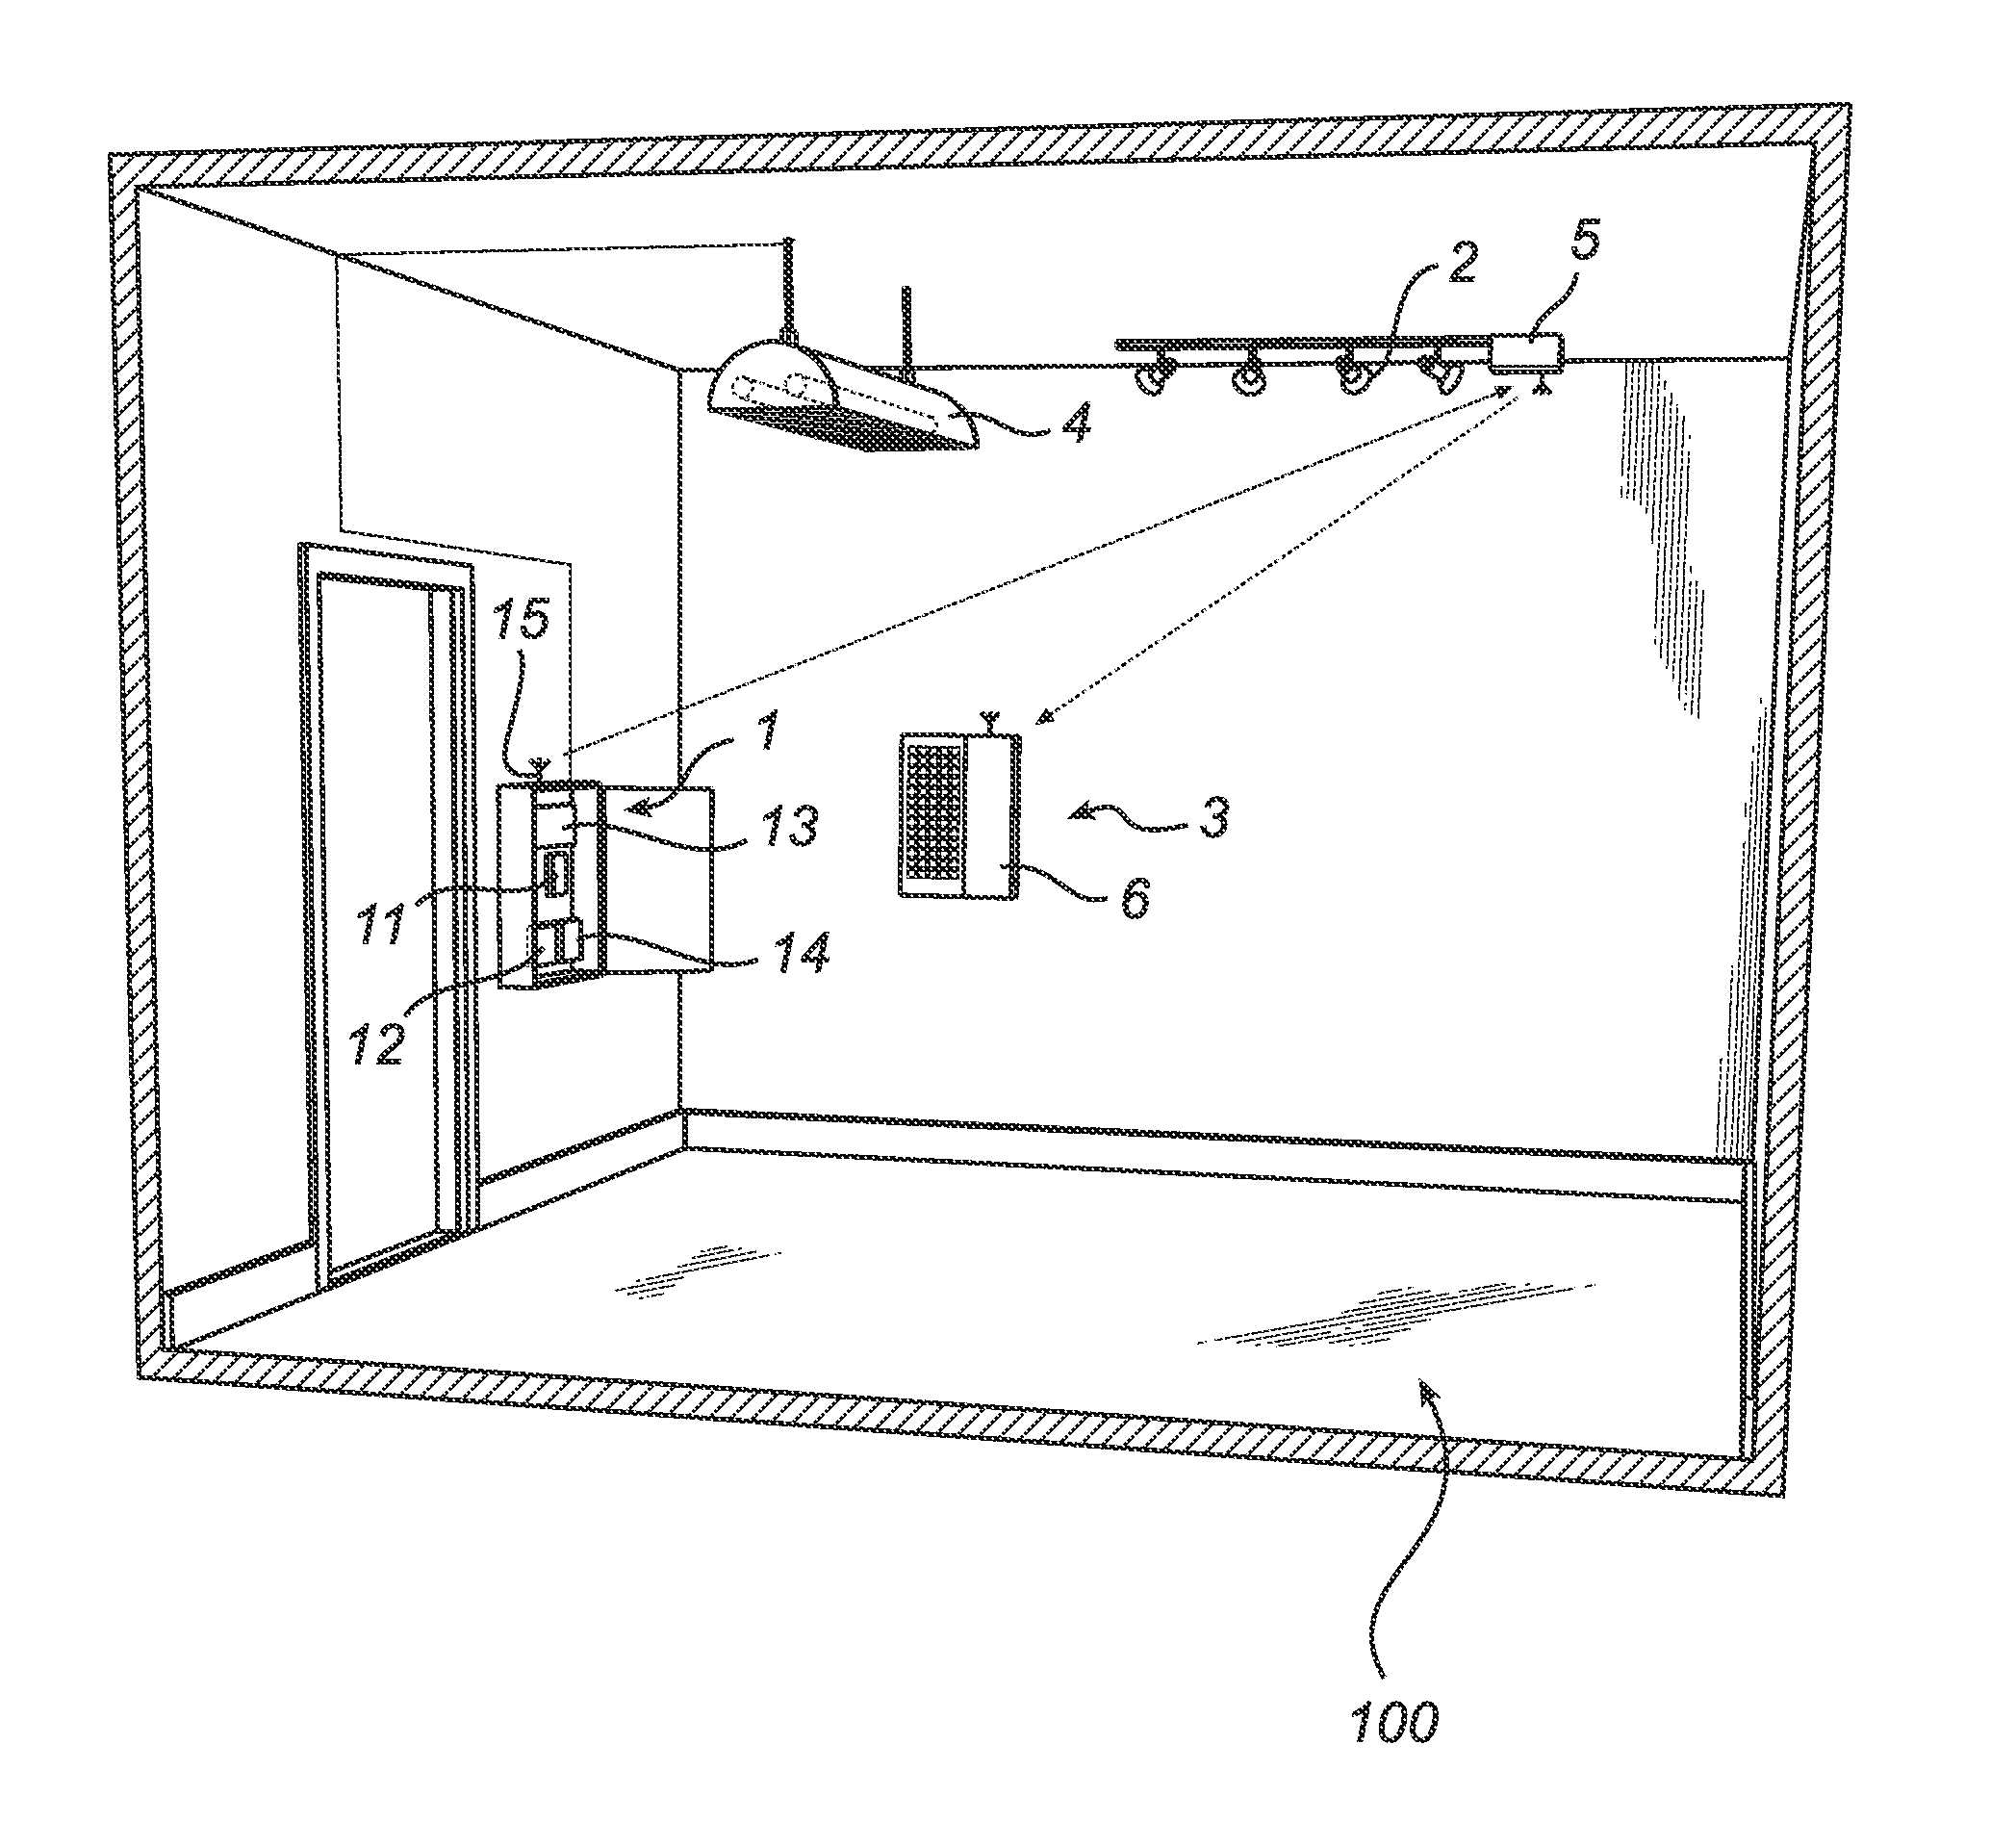 Method of controlling a lighting system